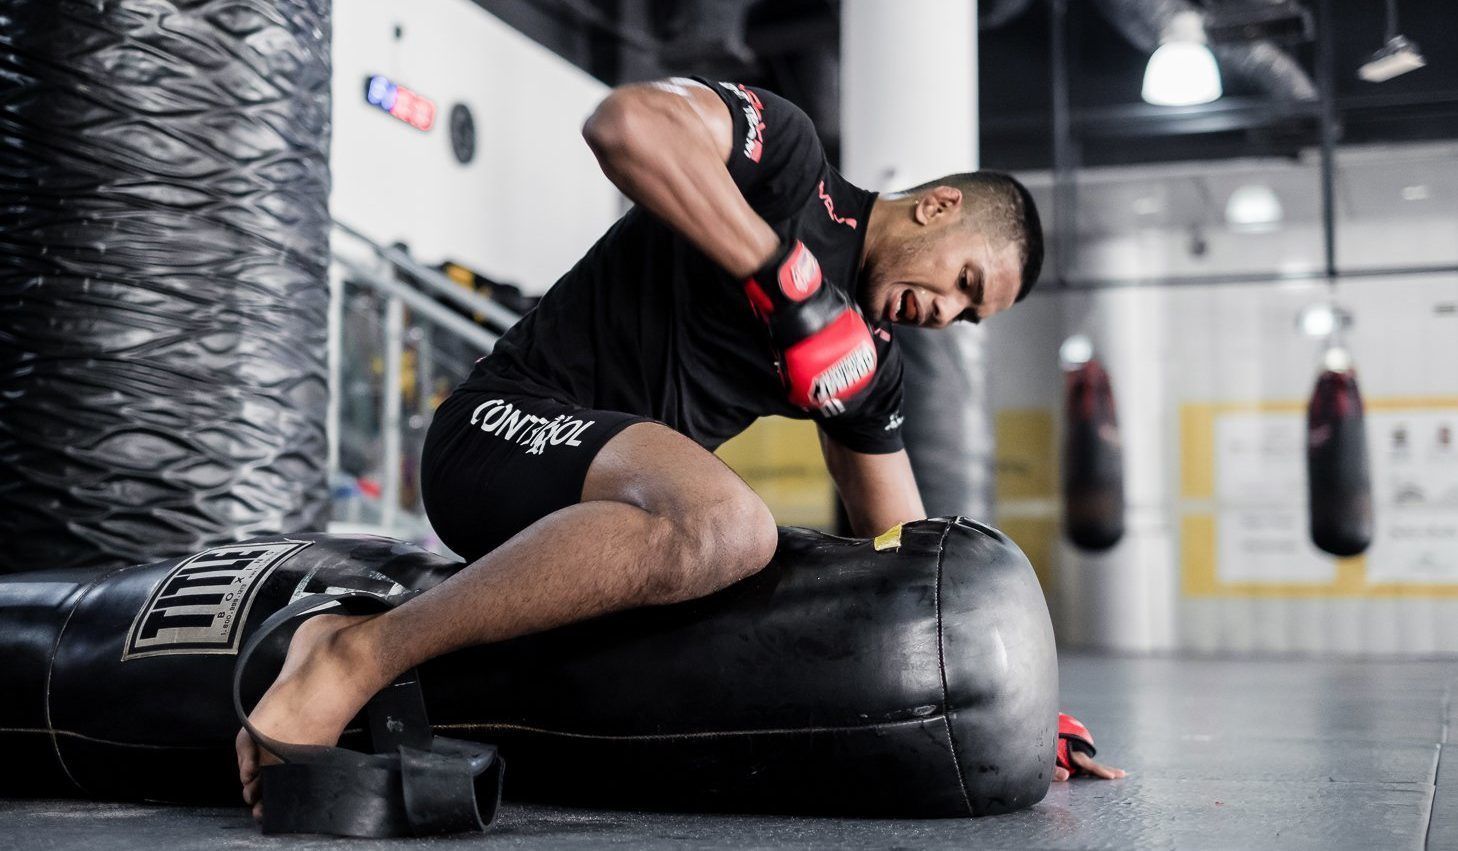 Victory-Ready: A Fighter's Guide to Purchasing MMA Gear